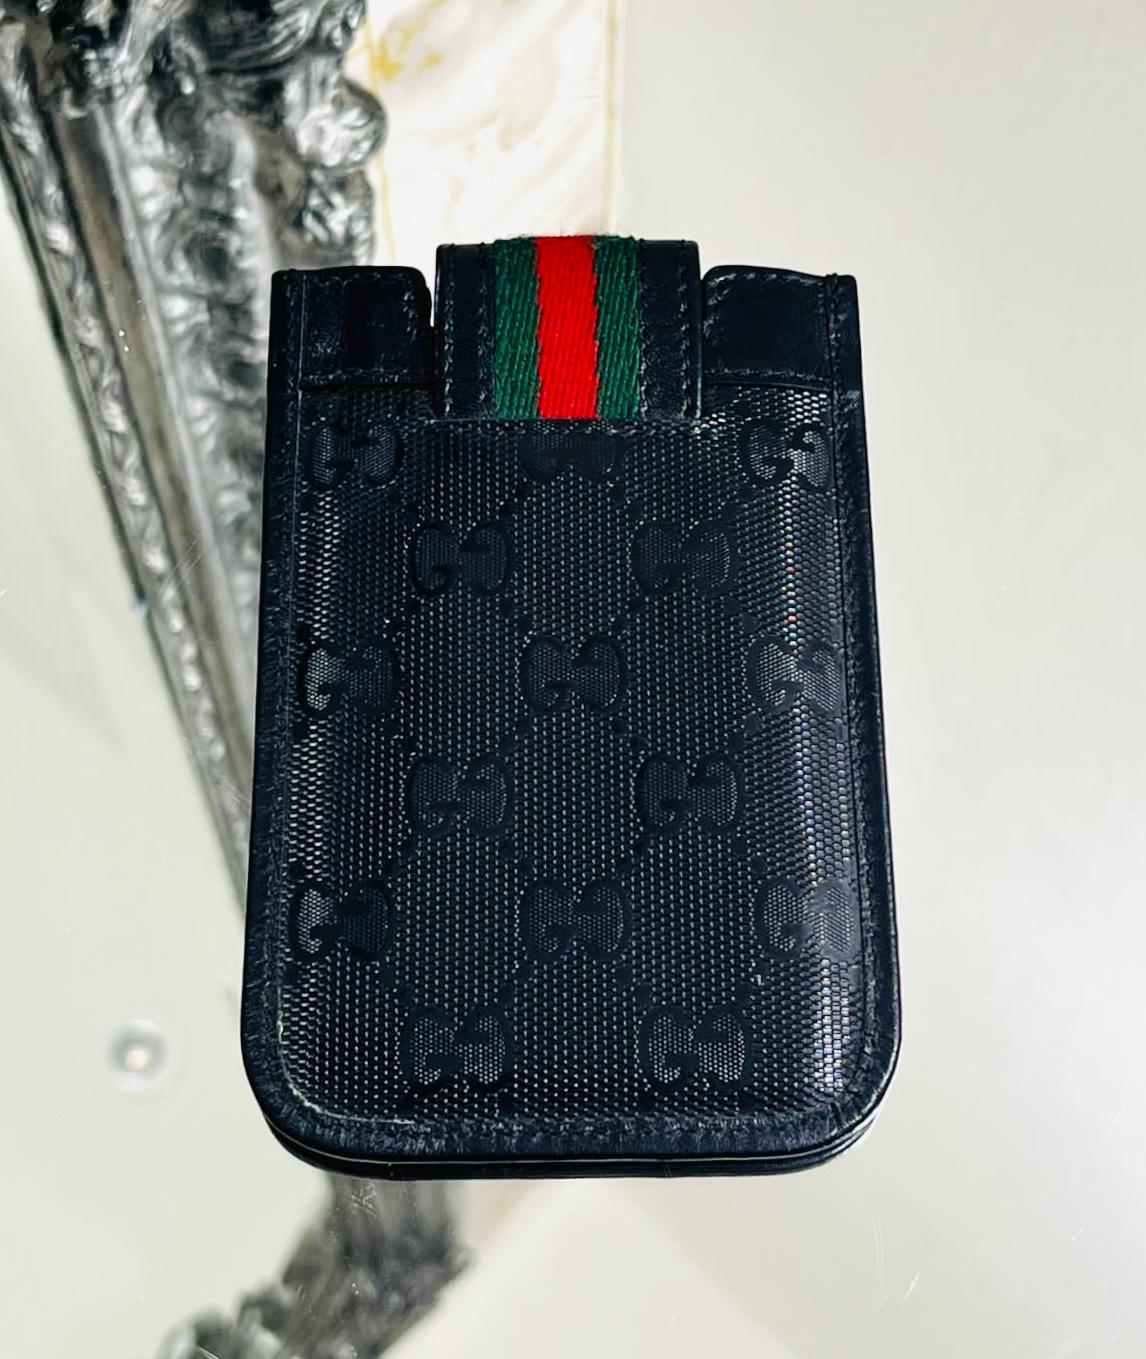 Gucci Guccissima Leather iPhone Case In Excellent Condition For Sale In London, GB